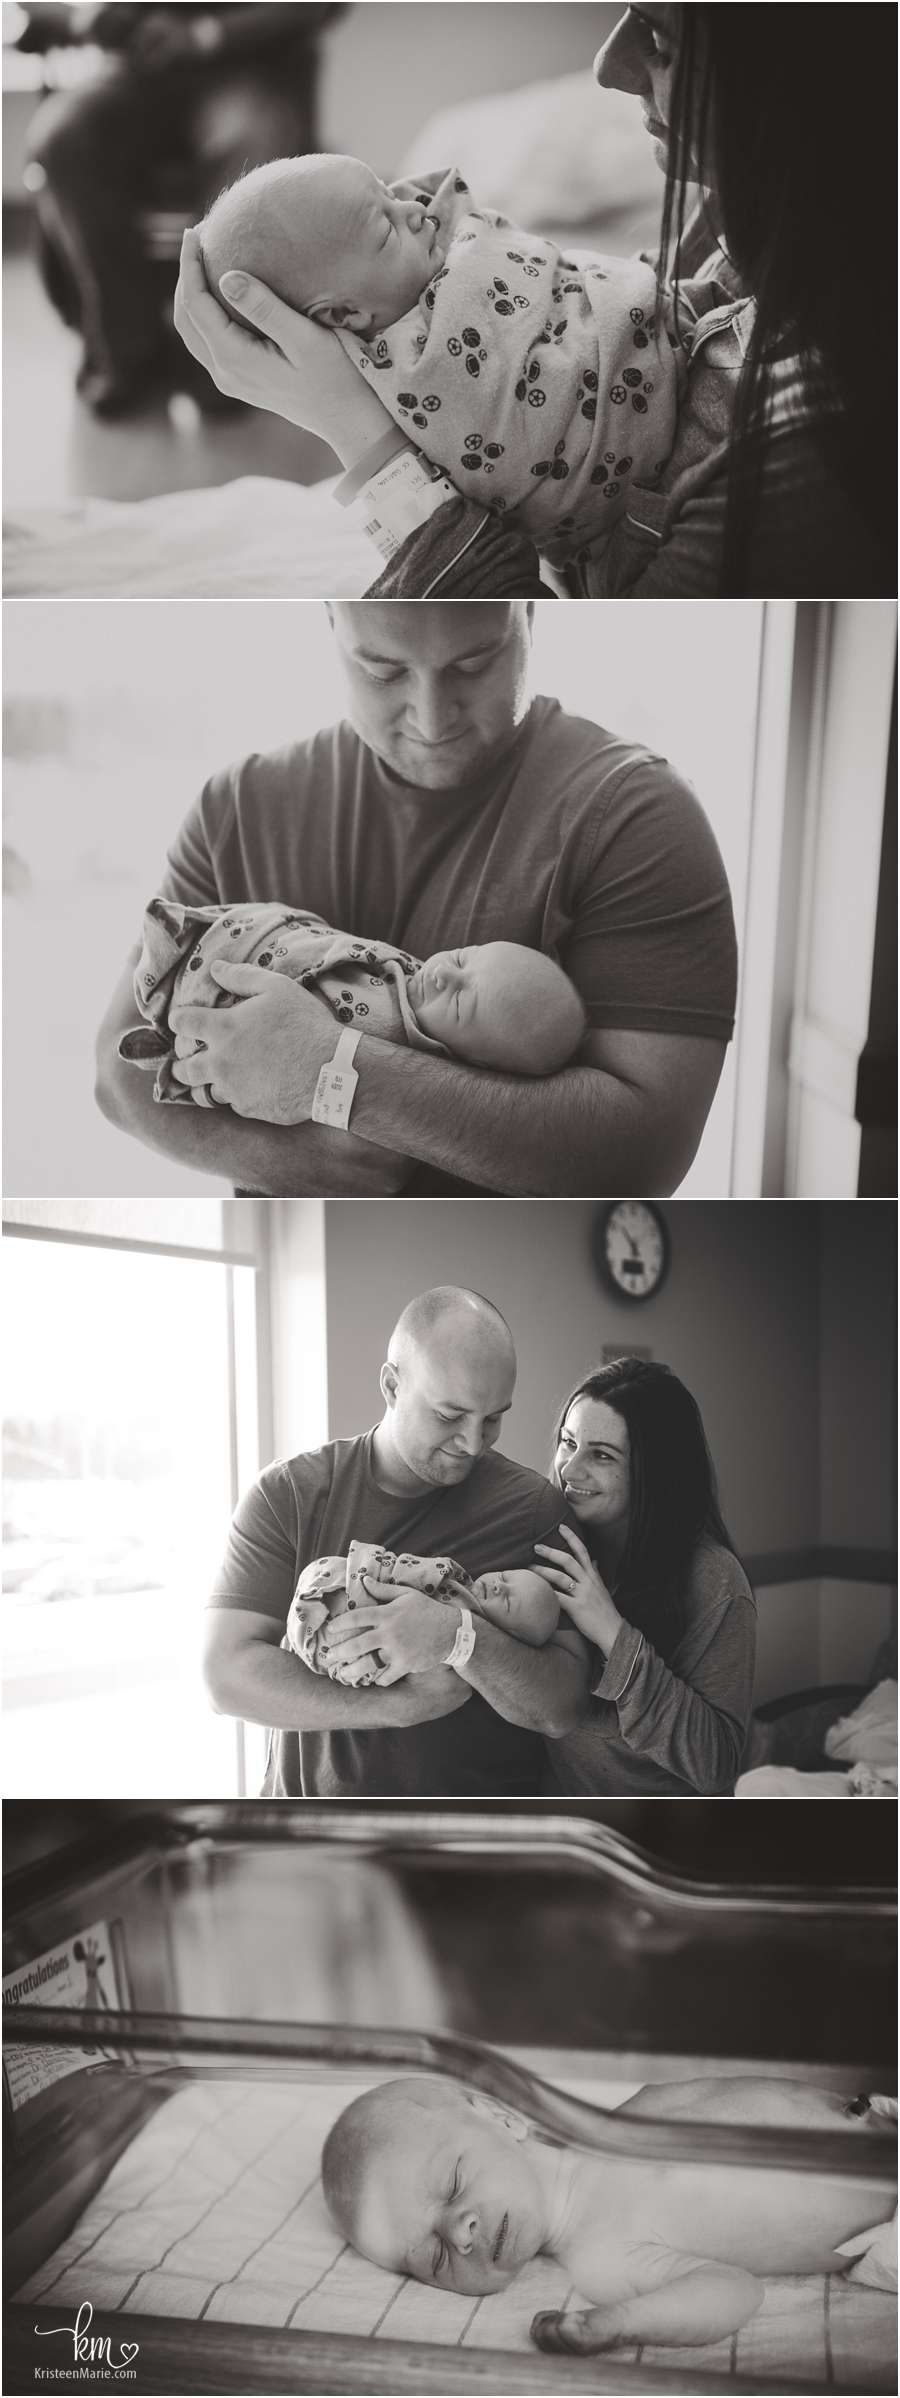 Fresh 48 poses - newborn photography pictures in hospital - great ideas